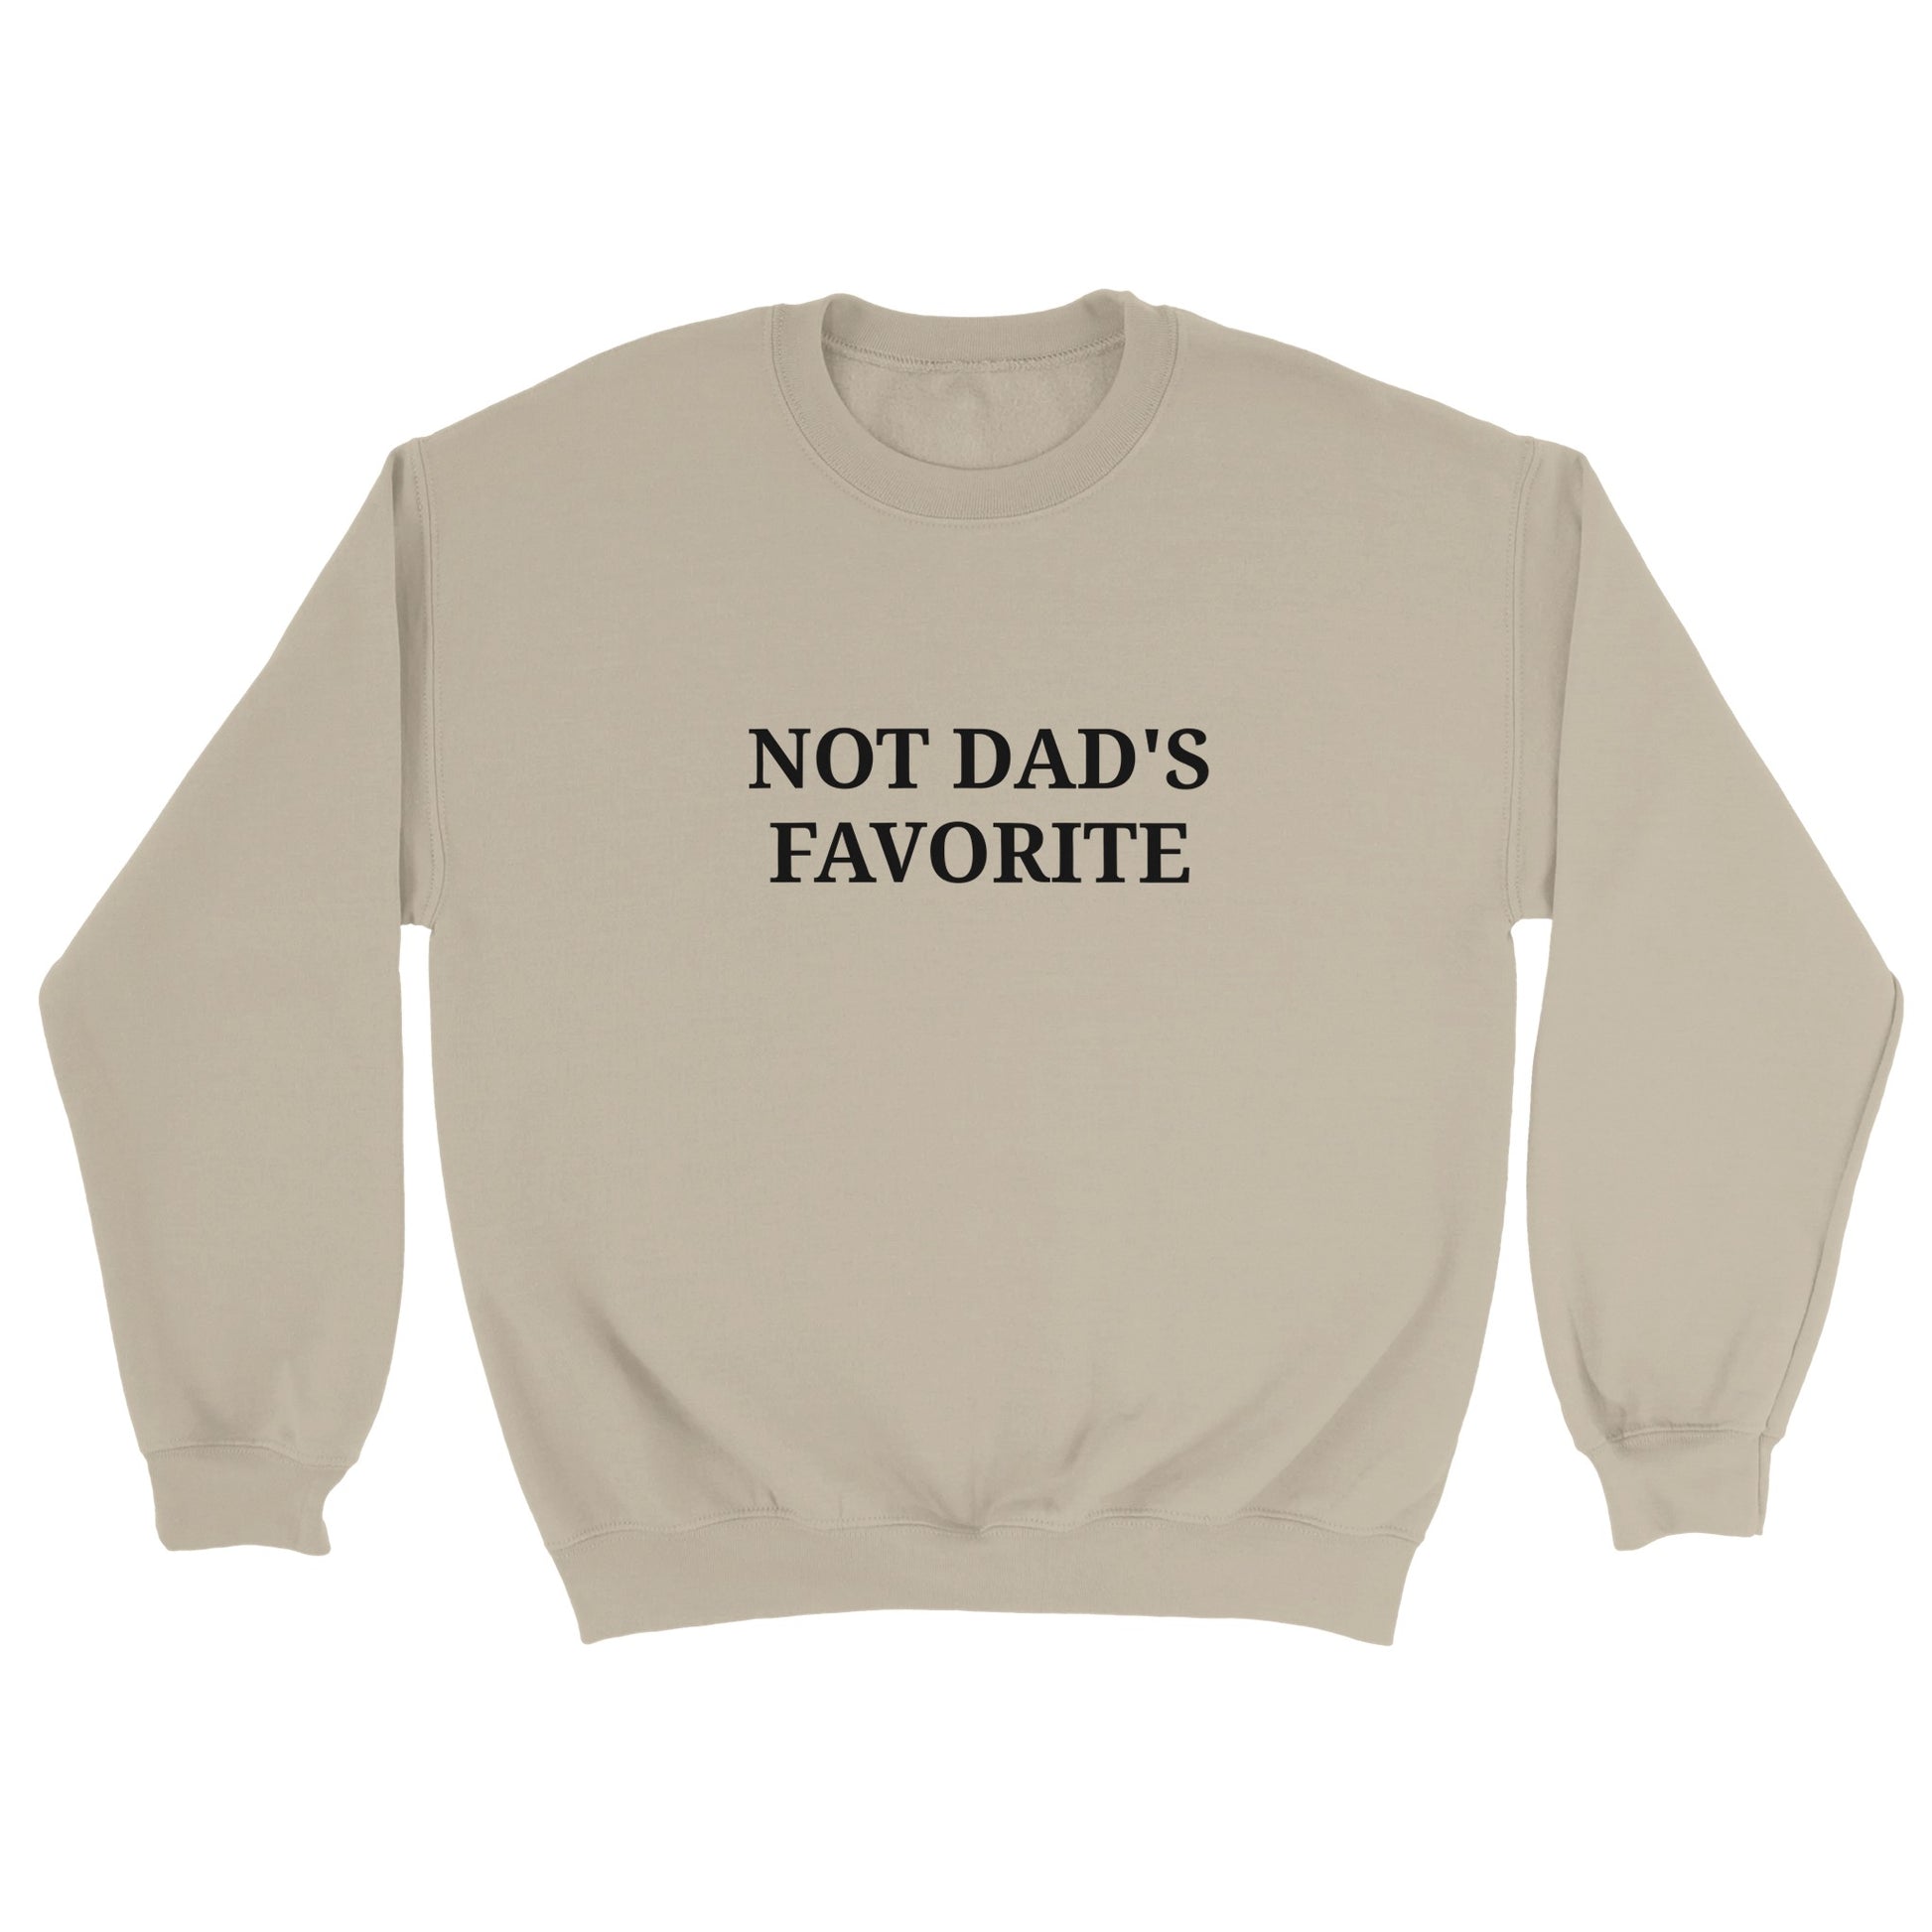 a beige sweatshirt with "Not dad's favorite" written across the chest